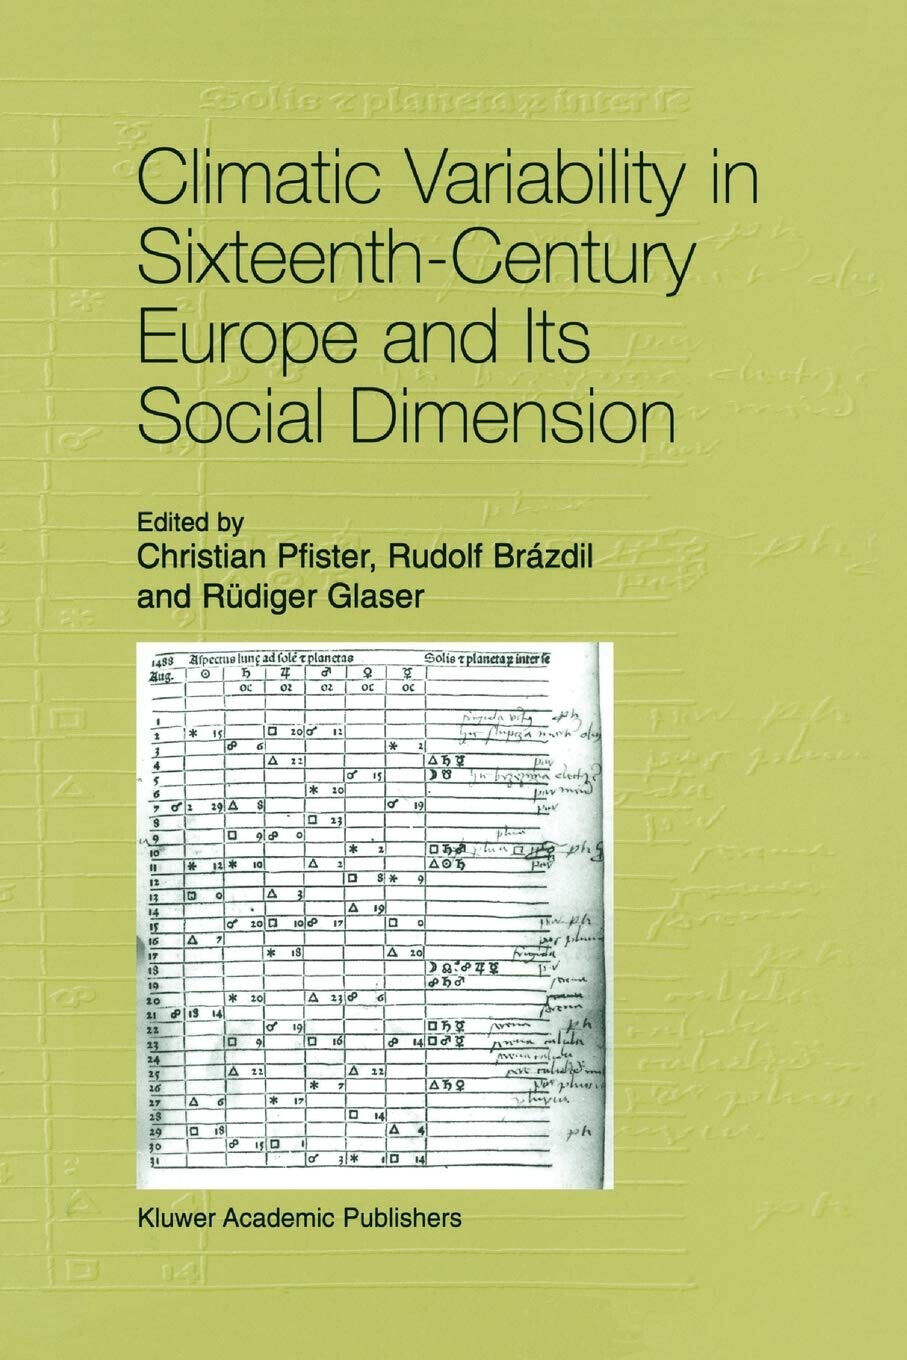 Climatic Variability in Sixteenth-Century Europe and Its Social Dimension - 2010 libro usato